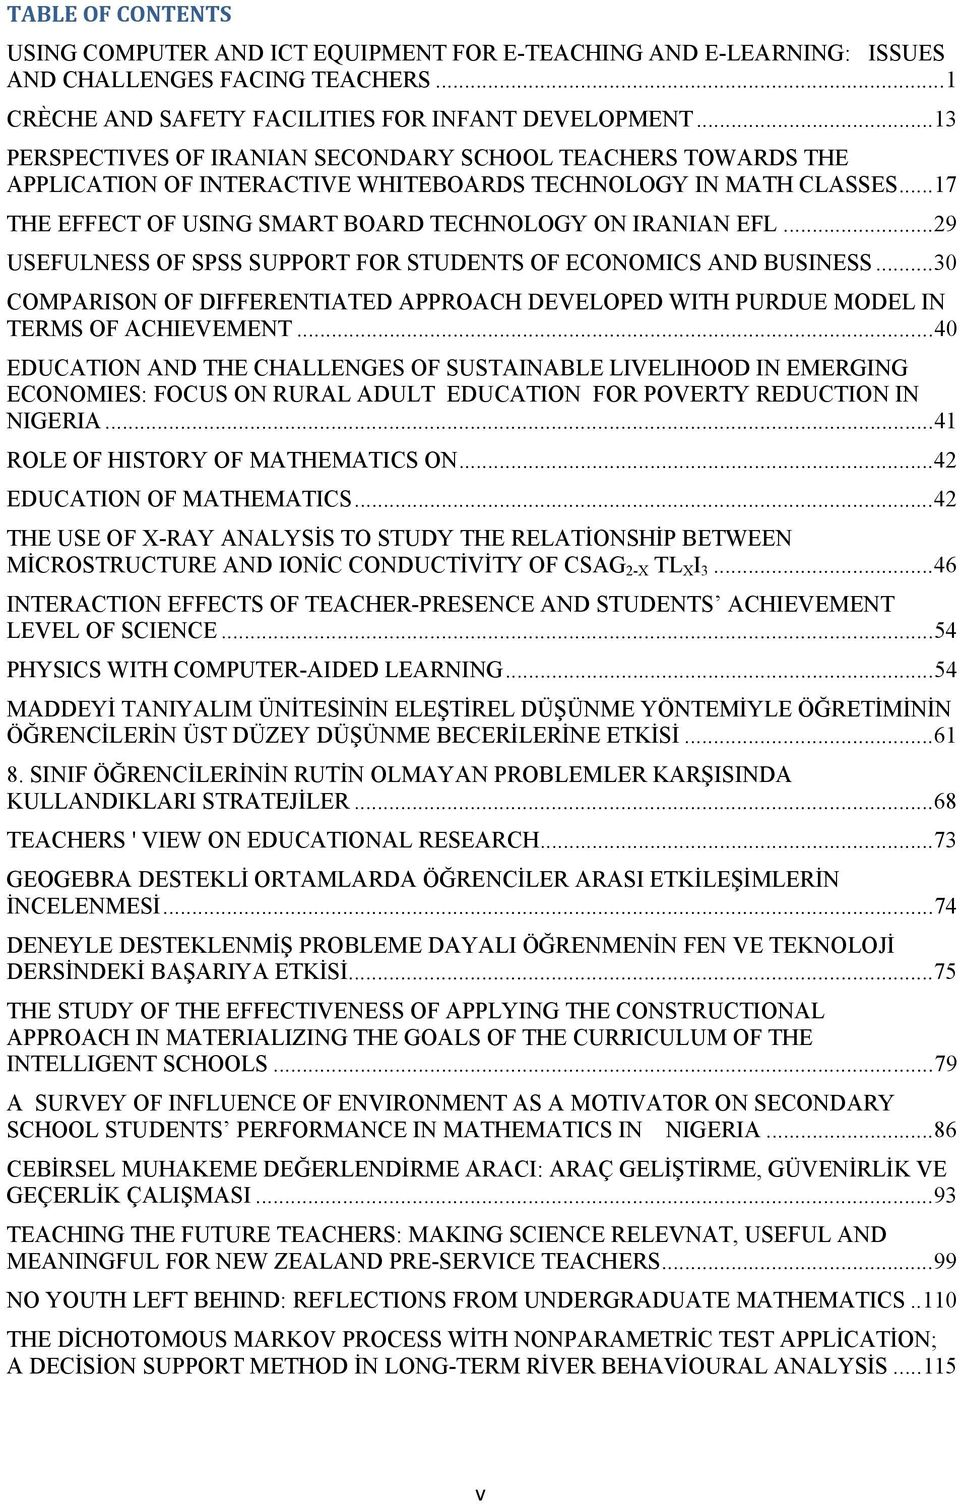 .. 29 USEFULNESS OF SPSS SUPPORT FOR STUDENTS OF ECONOMICS AND BUSINESS... 30 COMPARISON OF DIFFERENTIATED APPROACH DEVELOPED WITH PURDUE MODEL IN TERMS OF ACHIEVEMENT.